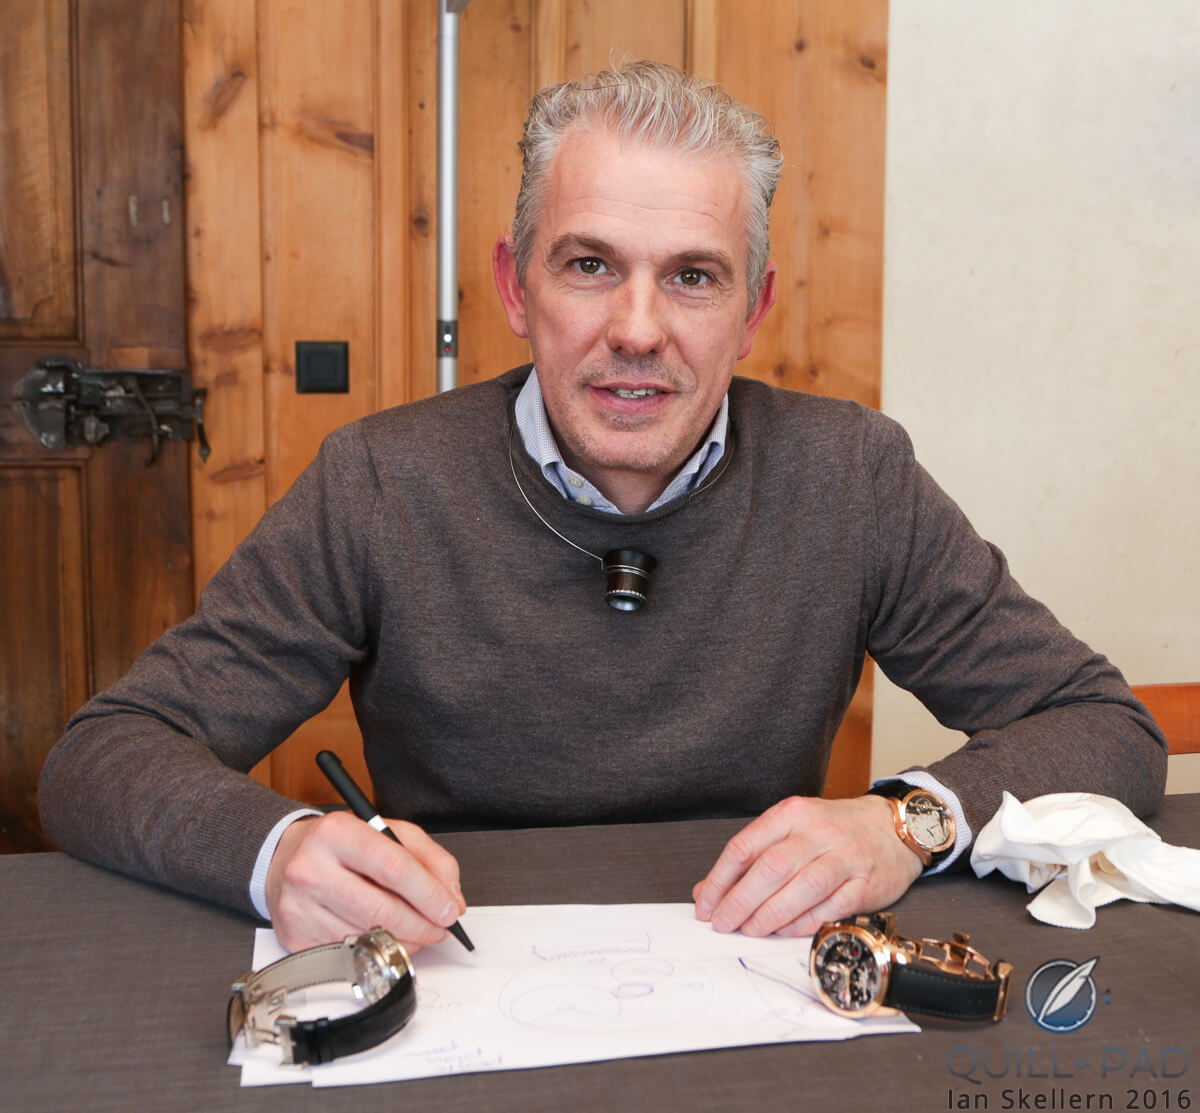 Didier Cretier, the man responsible for the Greubel Forsey Signature 1